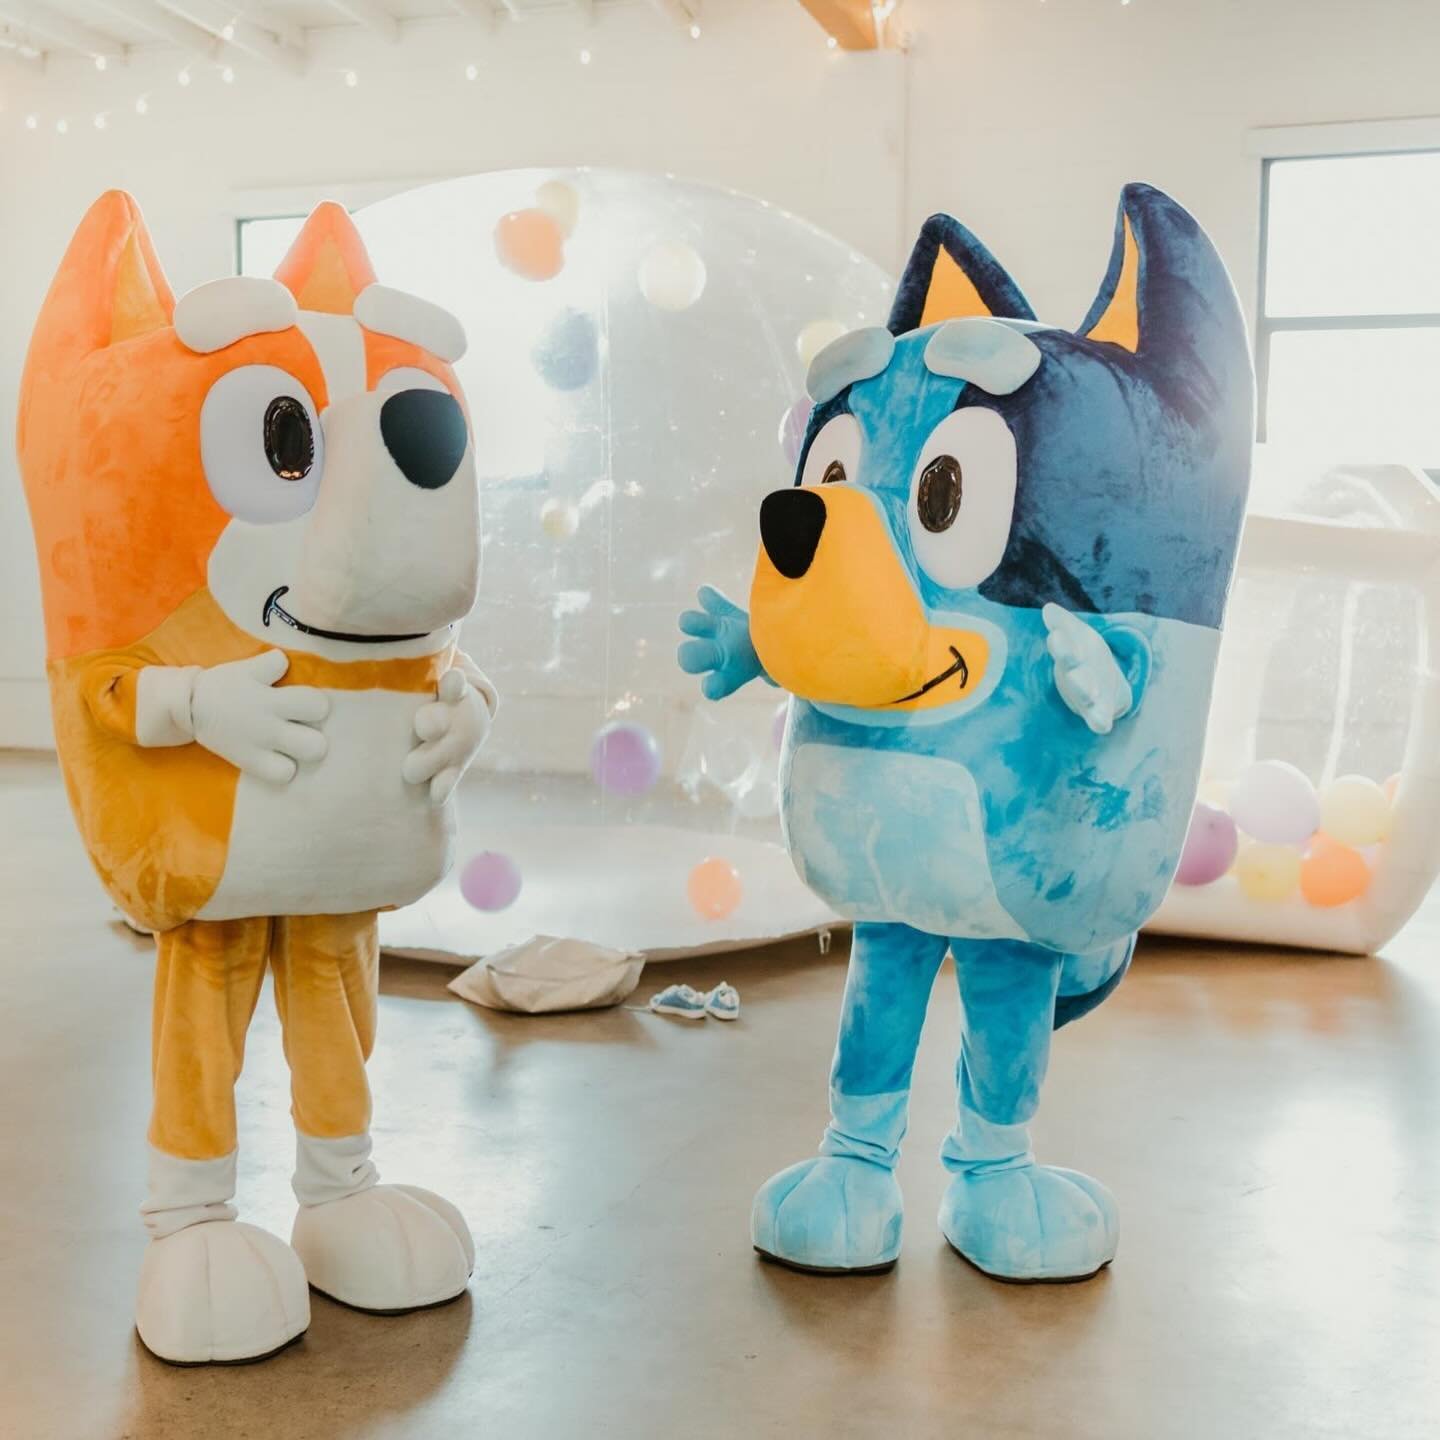 Bluey &amp; Bingo are bounce house ready! 🩵

The most fun set up on a POURING March day for Elena&rsquo;s 4th birthday

Photographer @charieee 
Design, concept, planning, rentals, backdrops &amp; balloons @isabellaspecialoccasions 
Bounce house &amp